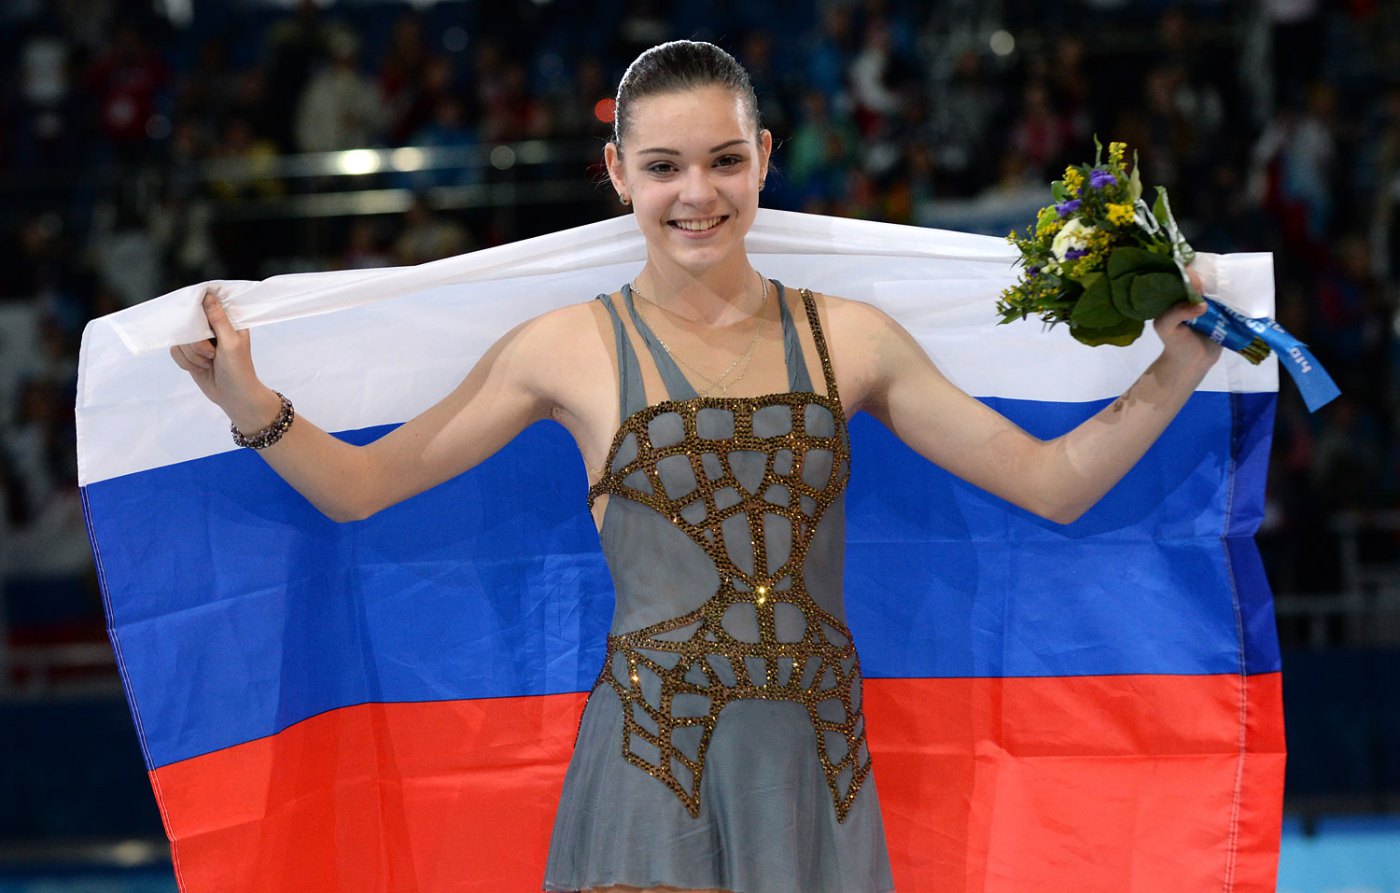 Russia's gold medalist Adelina Sotnikova celebrates during the Women's Figure Skating Flower Ceremony at the Iceberg Skating Palace during the Sochi Winter Olympics on February 20, 2014.